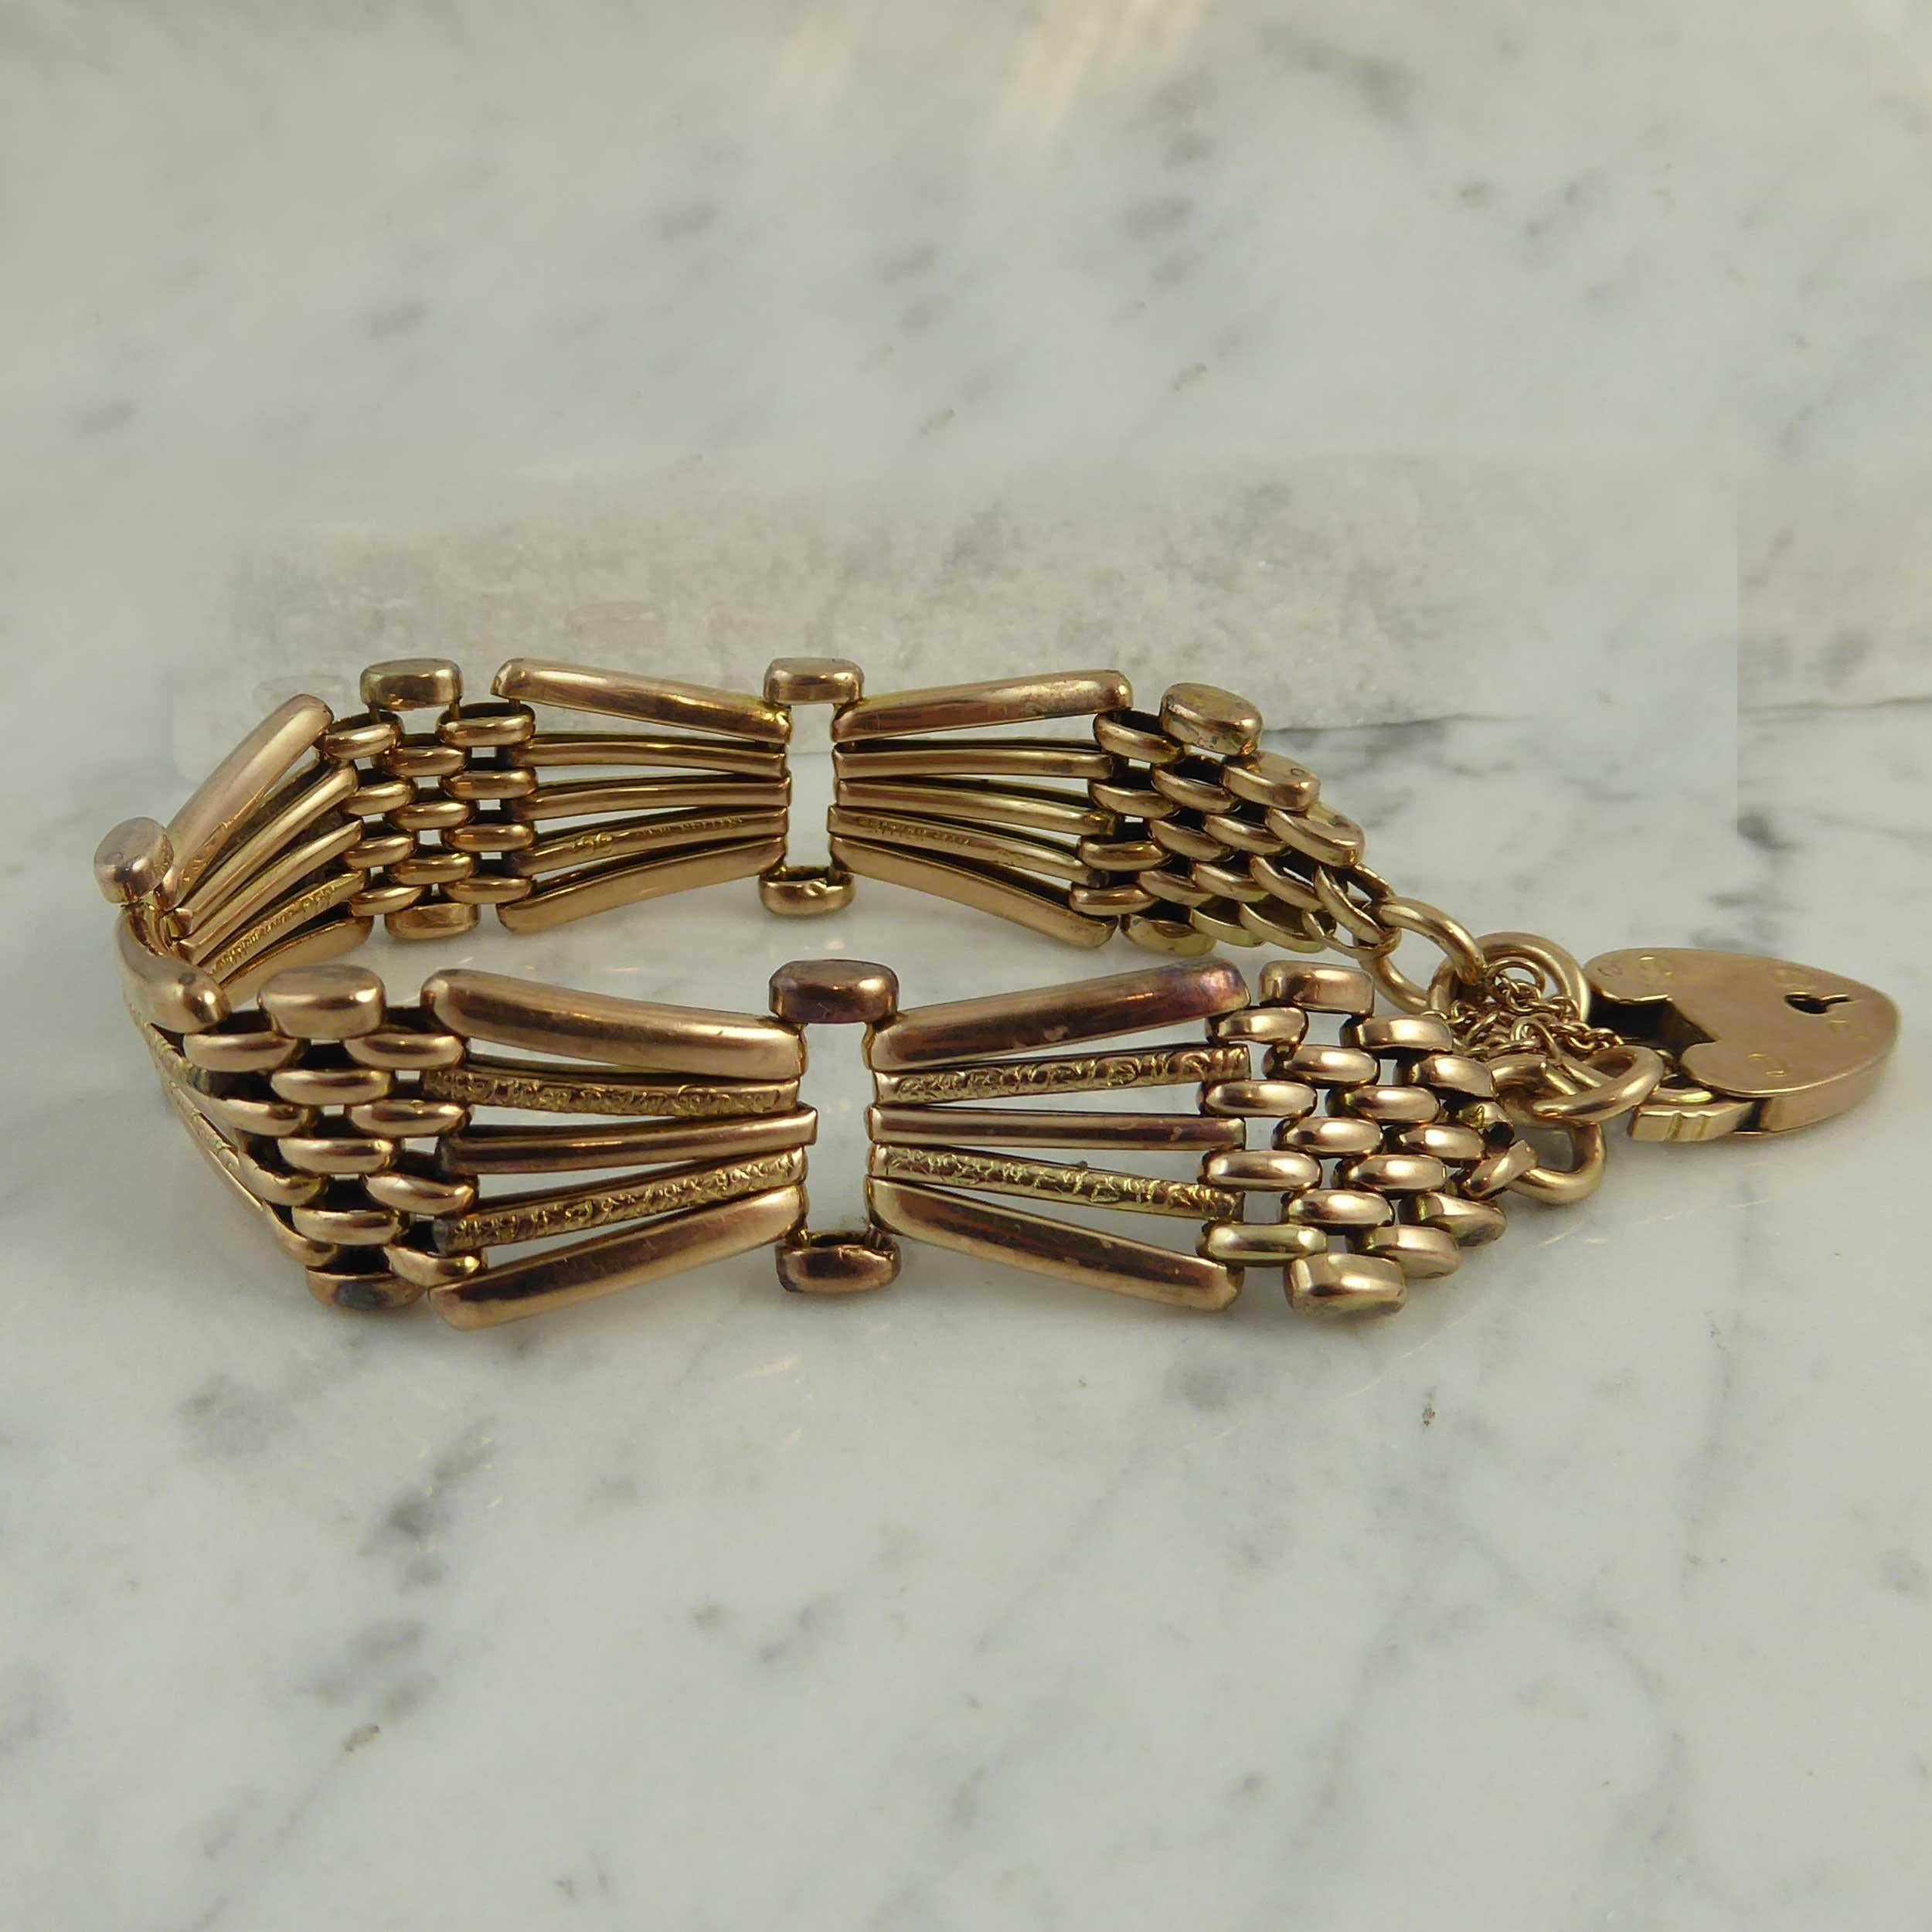 A super example of the popular gold gate bracelet.  This fine classic is comprised of three bow-shaped sections in rose gold, each approx. 1.5 inches long x 0.63 inch wide.  The bows are fashioned from five gold bars - three plain polished